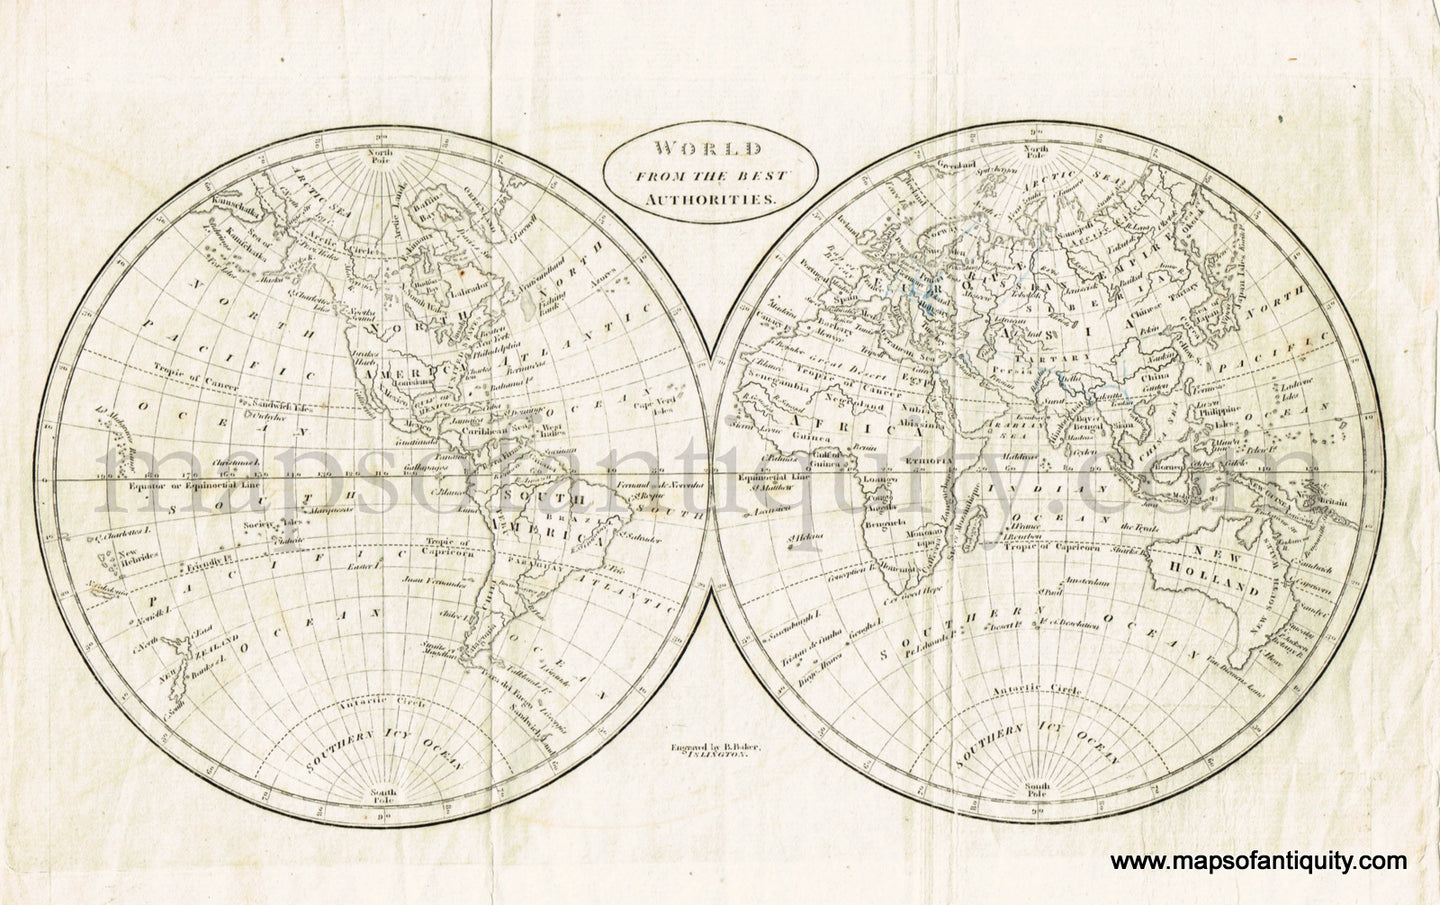 Antique-Black-and-White-Map-World-From-the-Best-Authorities-World--1800-Baker-Maps-Of-Antiquity